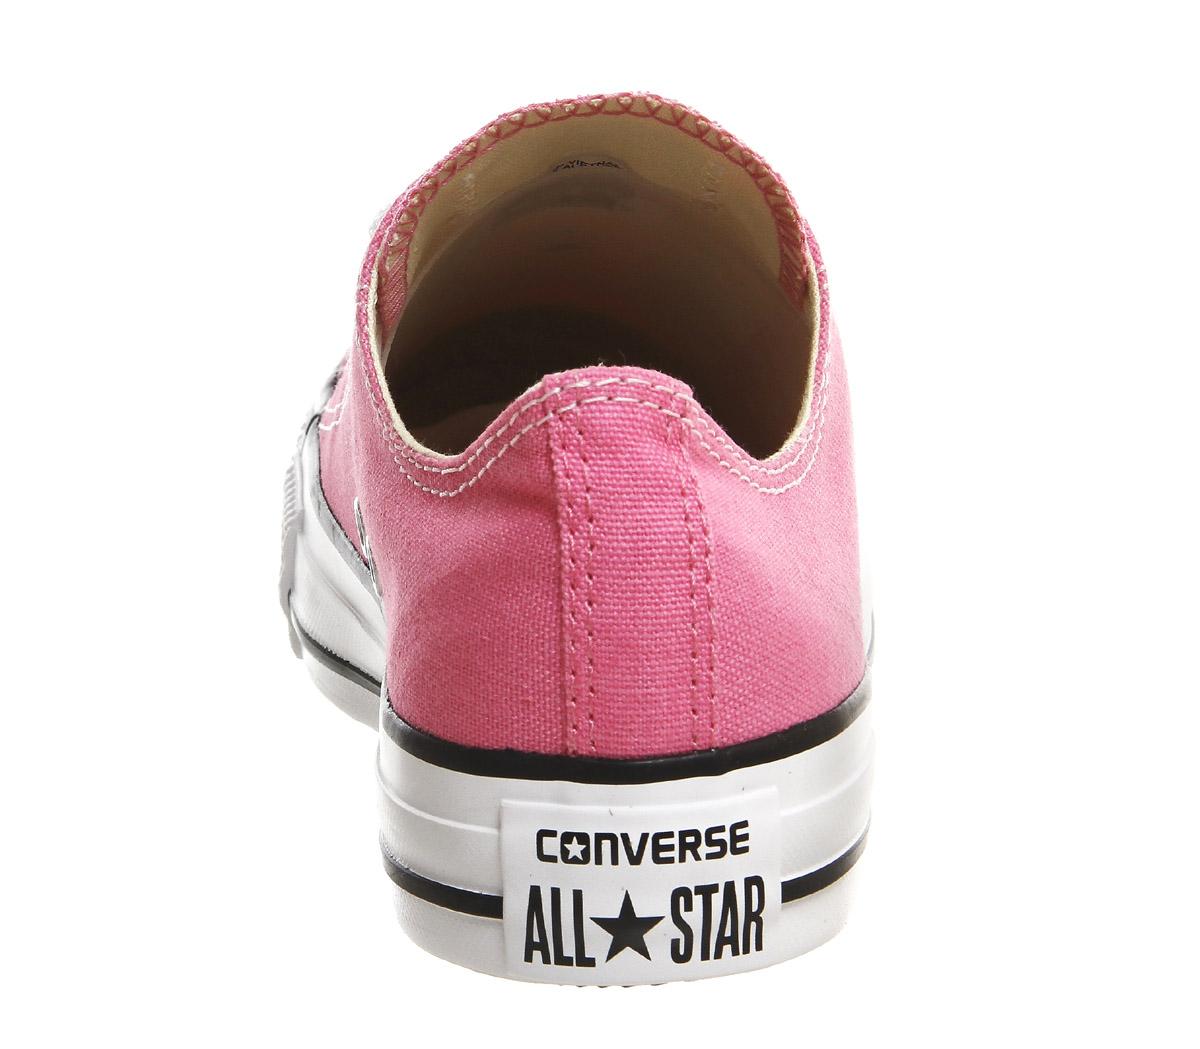 Converse All Star Low Pink Canvas - Hers trainers